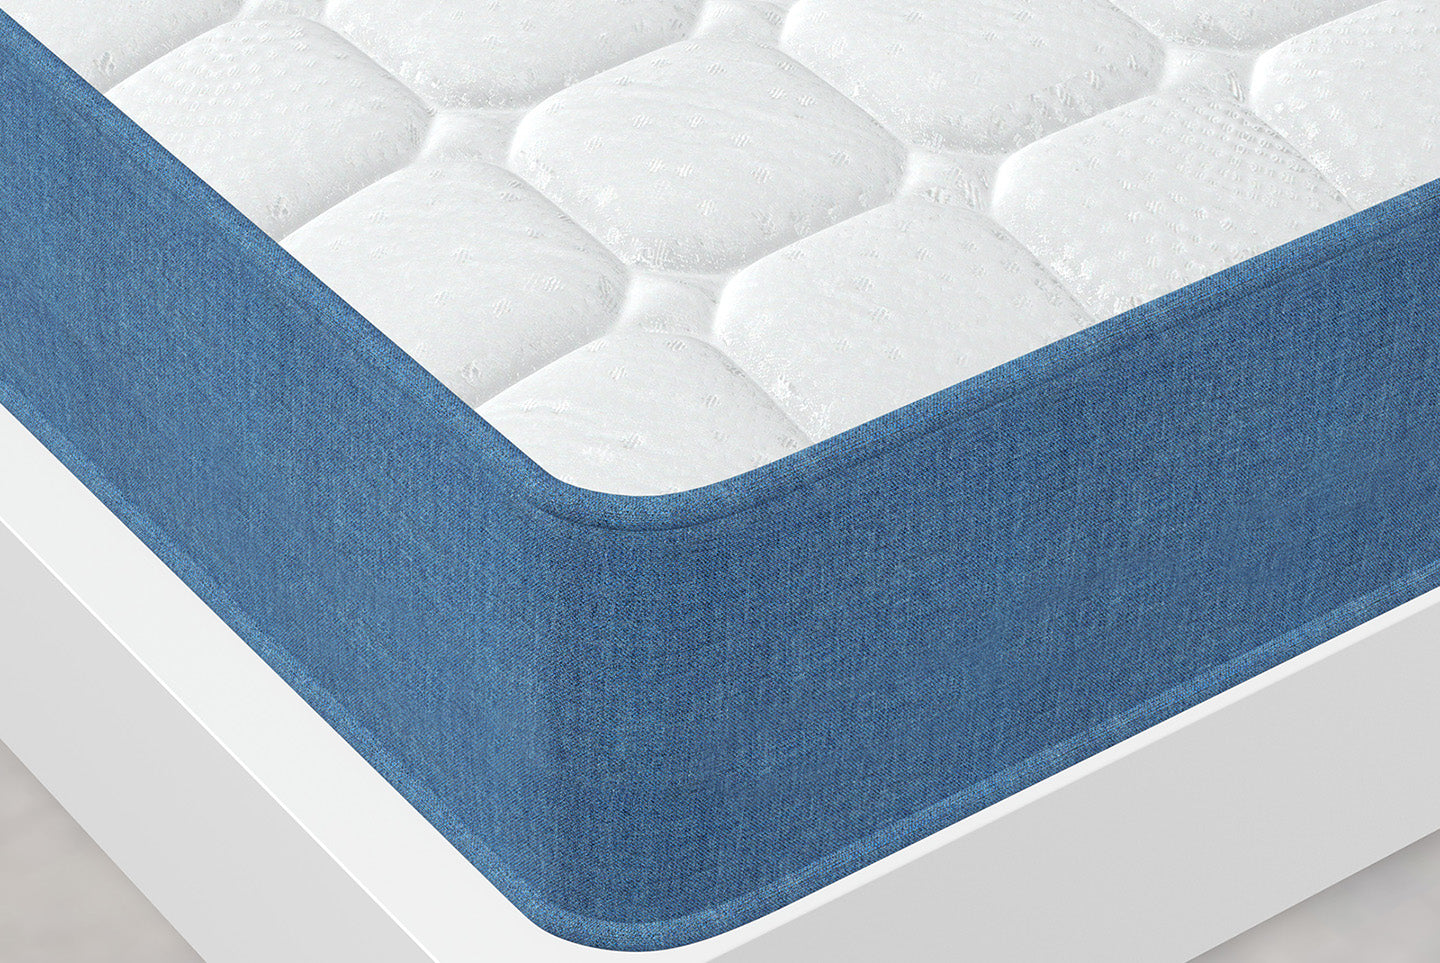 Cooling Gel Memory Foam Mattress 20CM Double-Layer Medium Firm Mattress Pressure Relief with Breathable Fabric